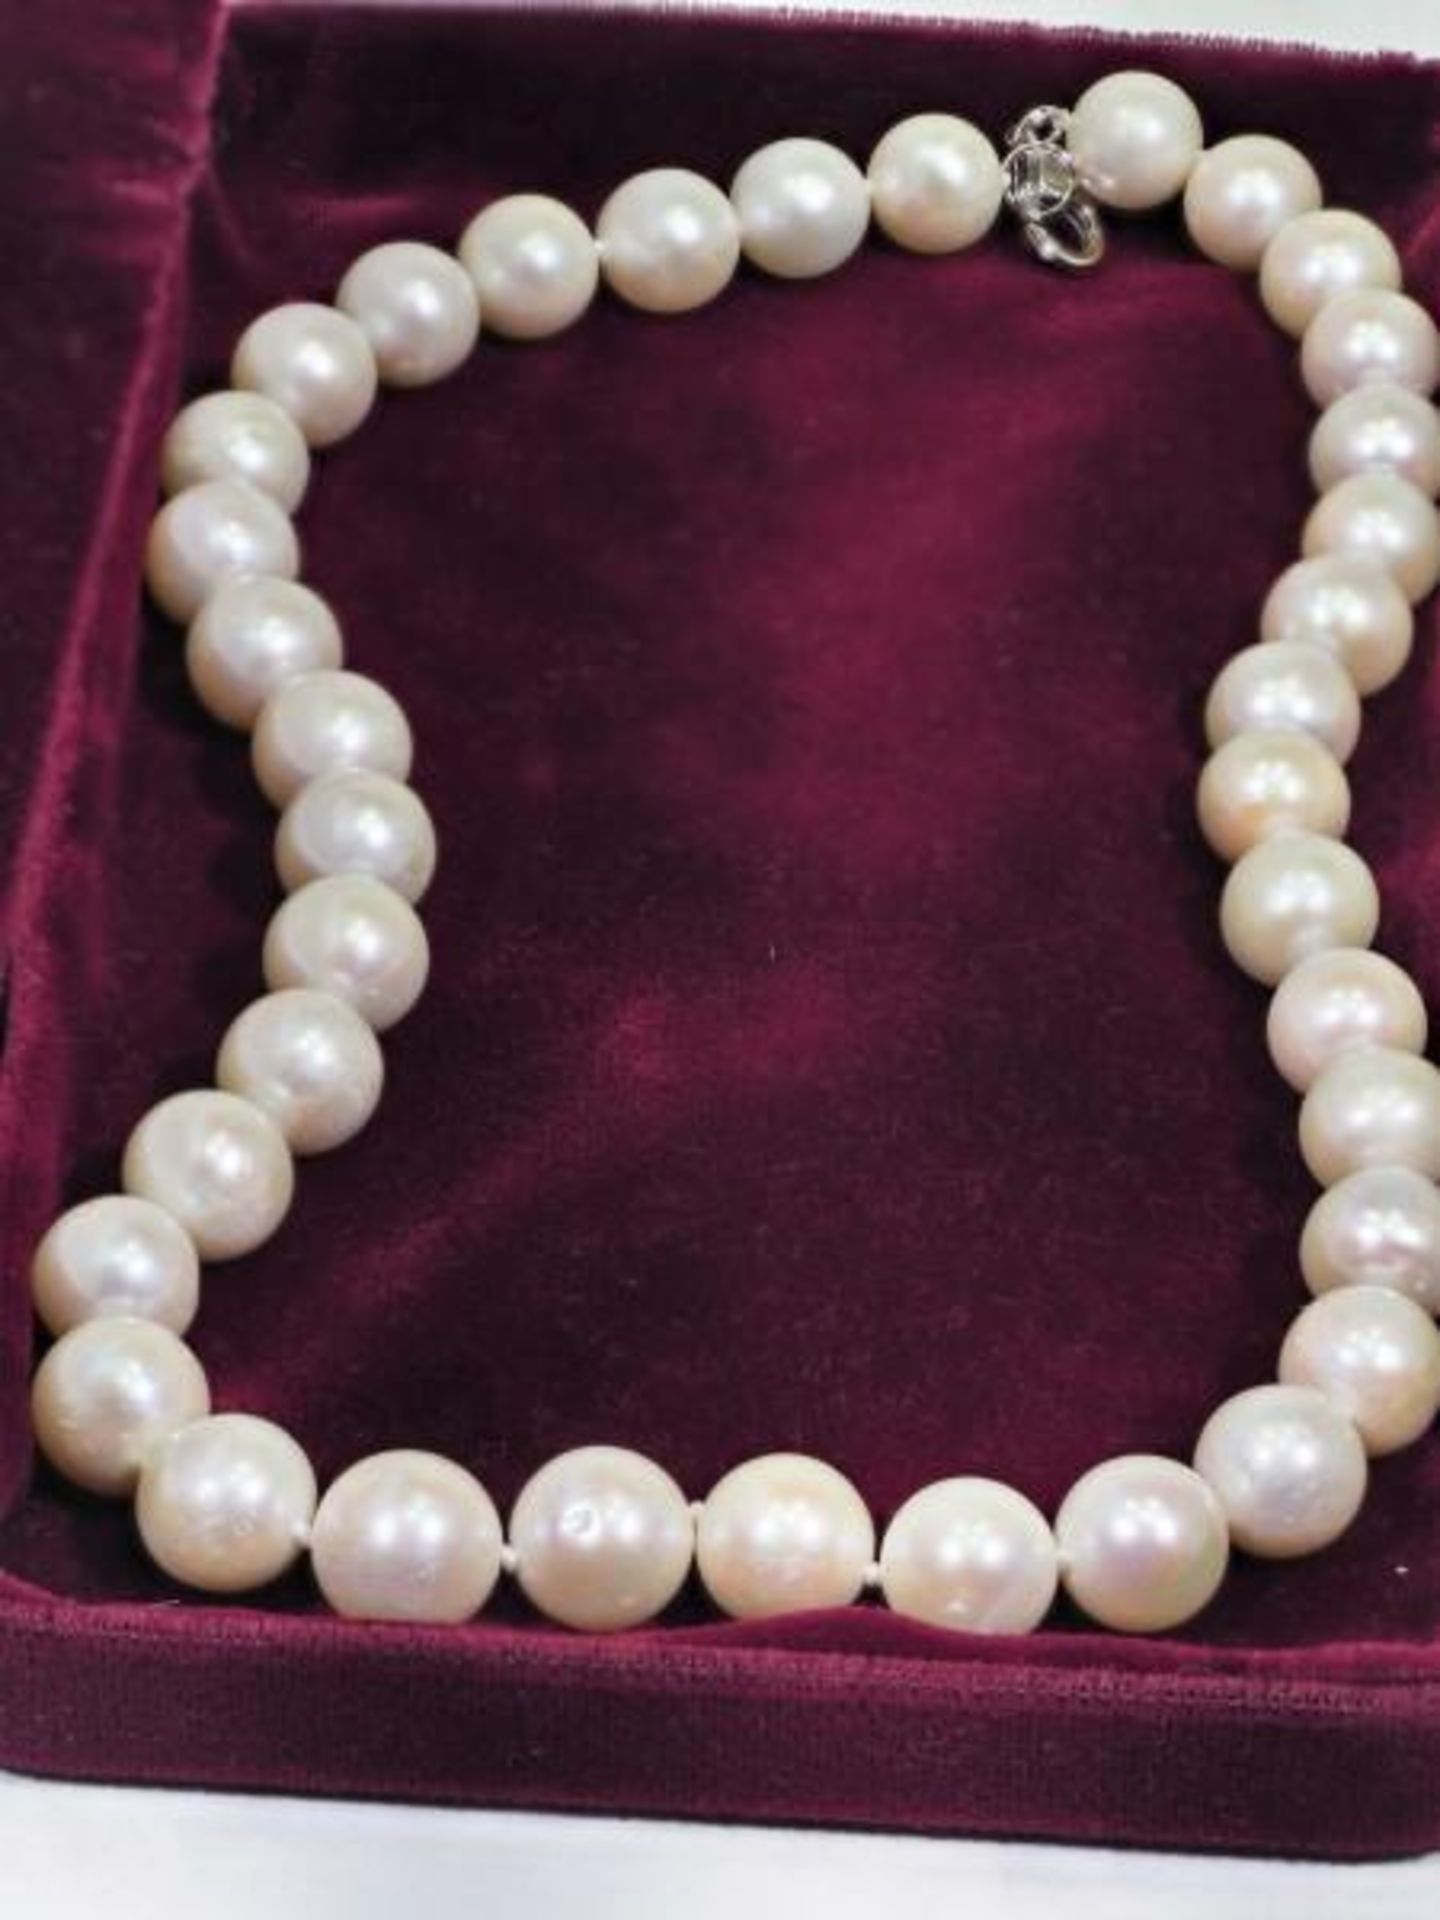 Good Quality Genuine Fresh Water Pearl (10 - 13 mm) Necklace with S.Silver Clasp. Retail $600 (MS07 - Image 2 of 2